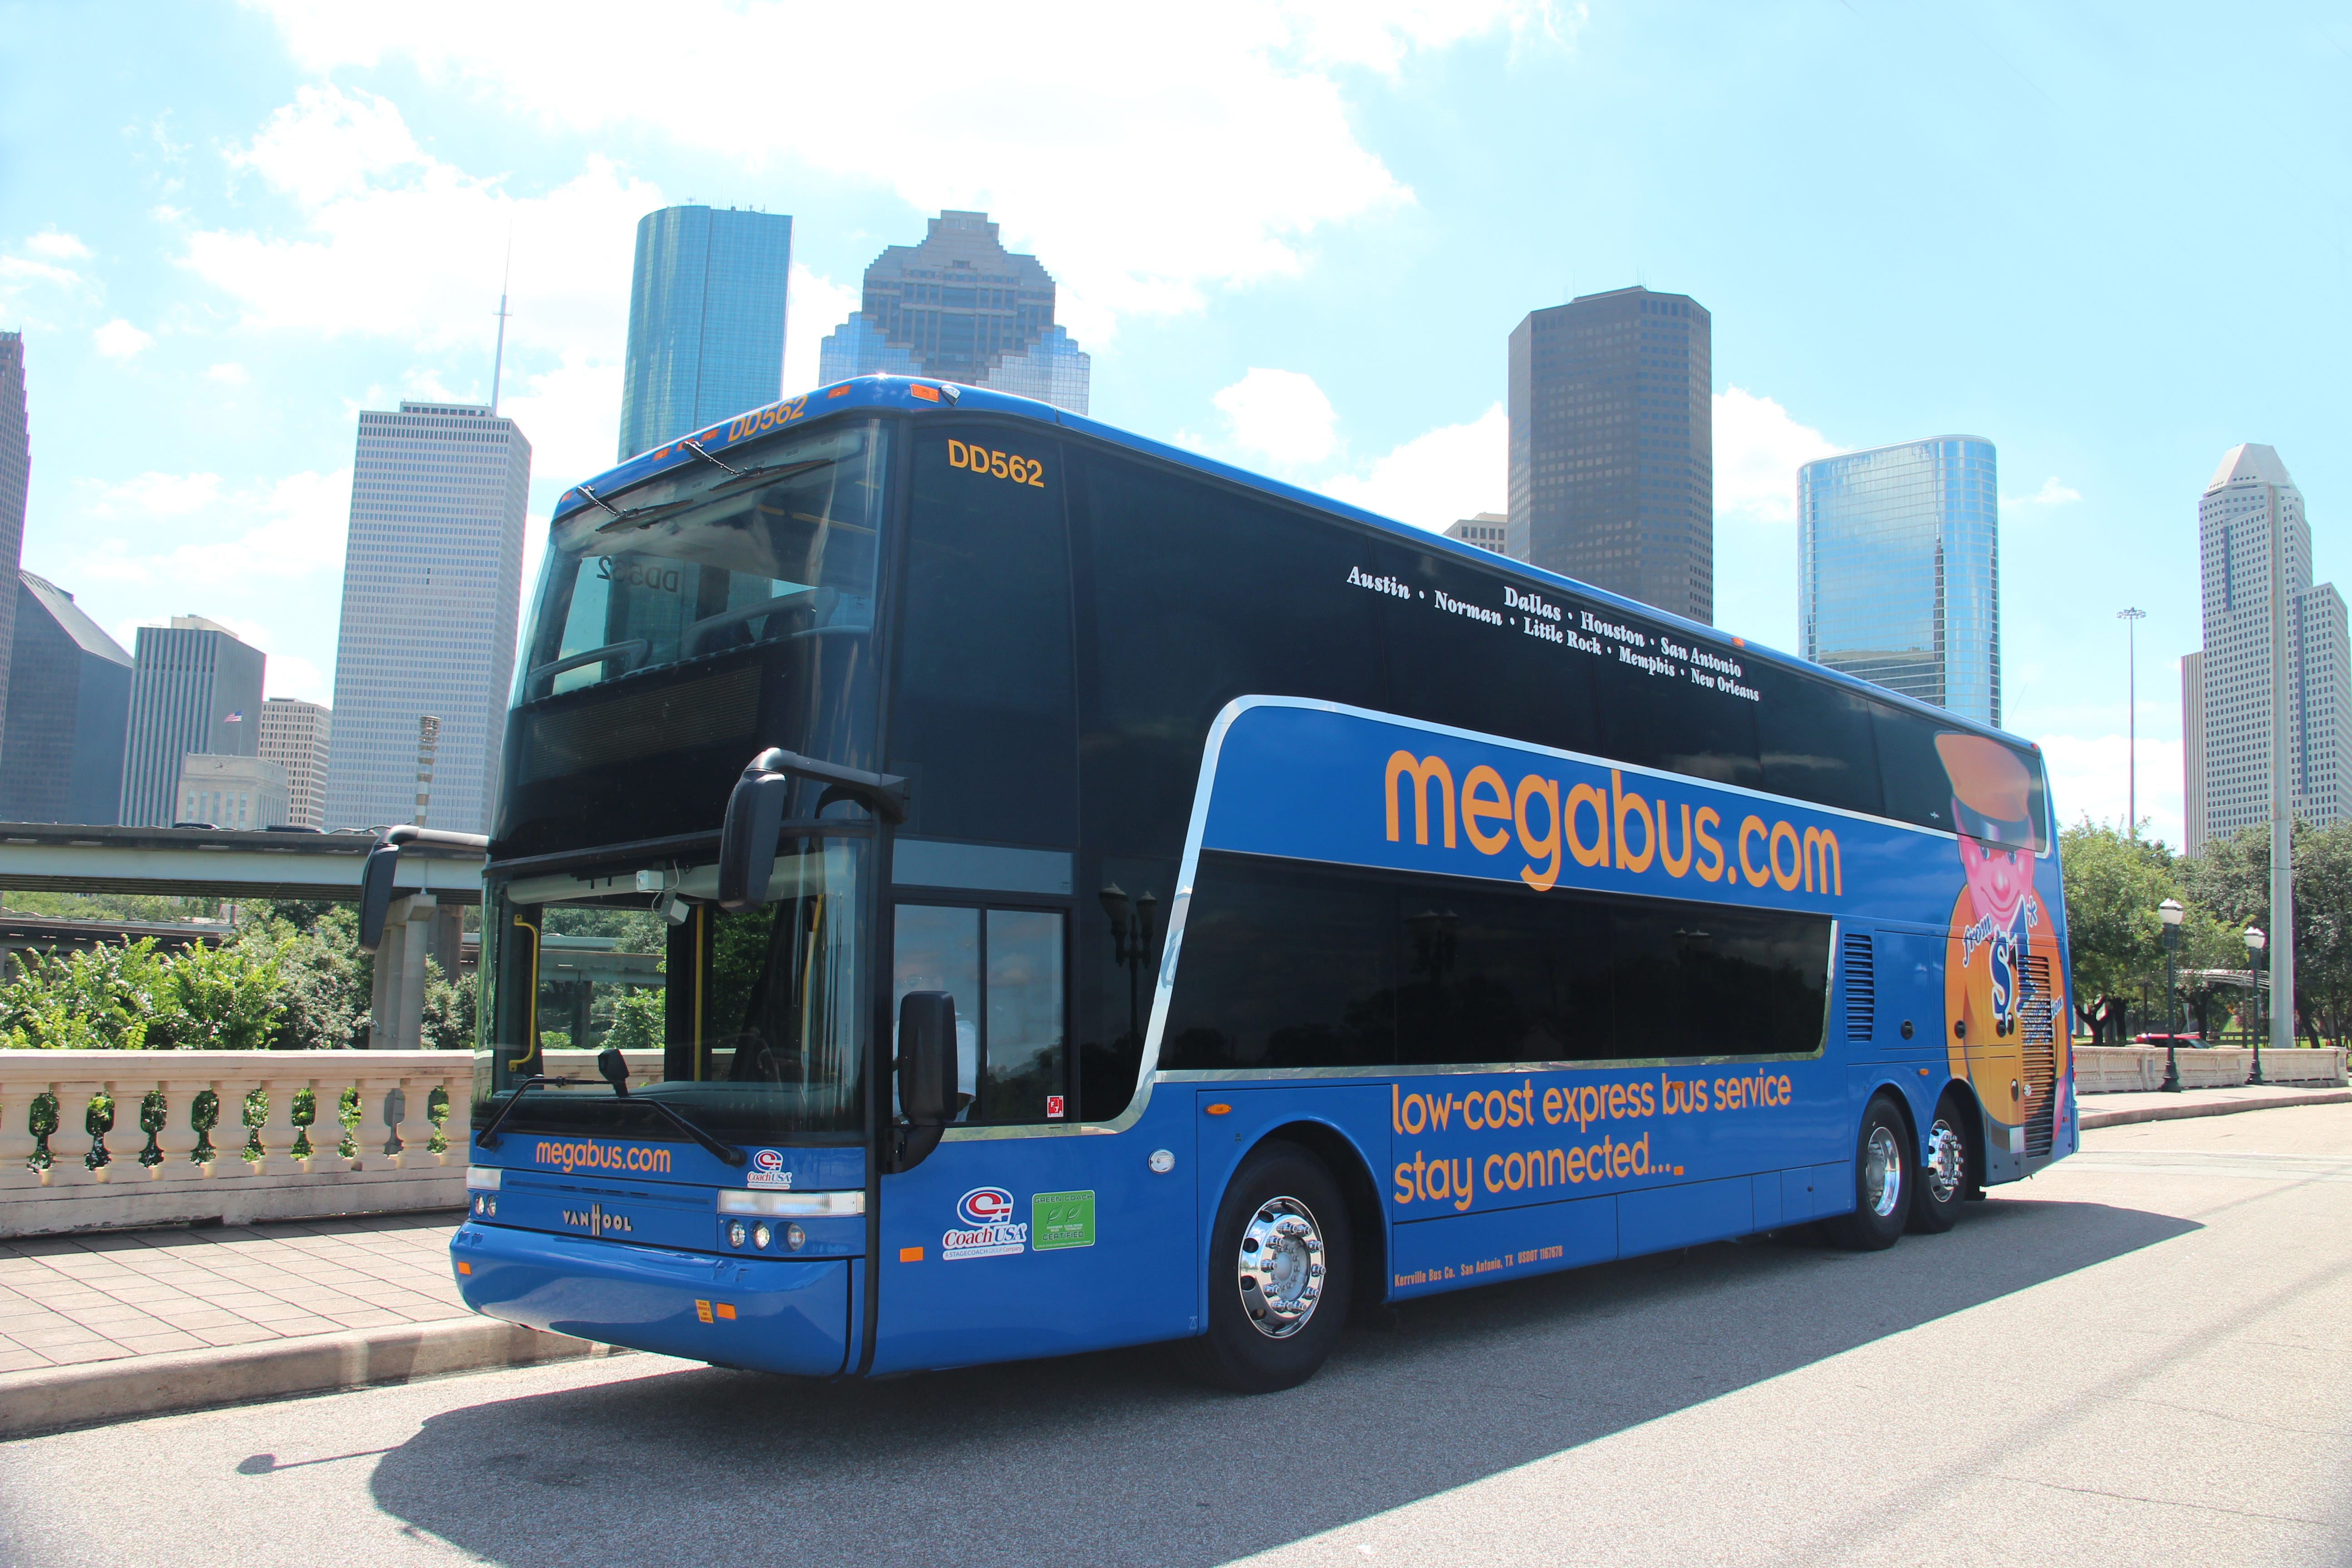 There are 3 keys to scoring one dollar Megabus seats